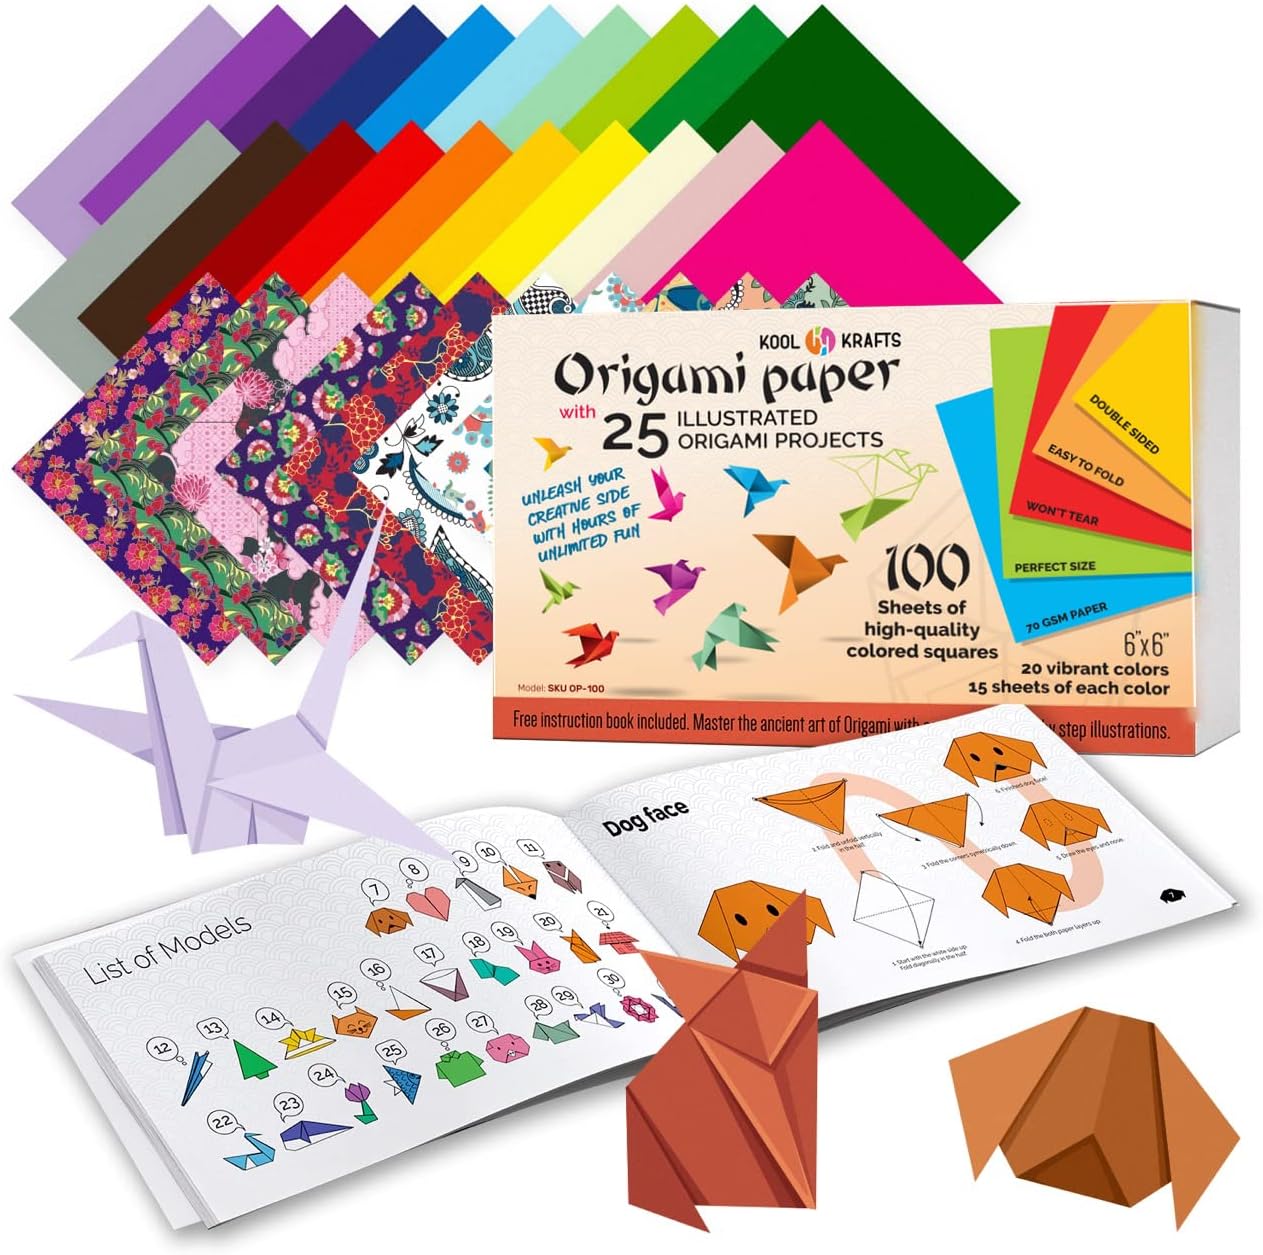 Kit 100 Origami Papers, 100 sheets, 20 different colors